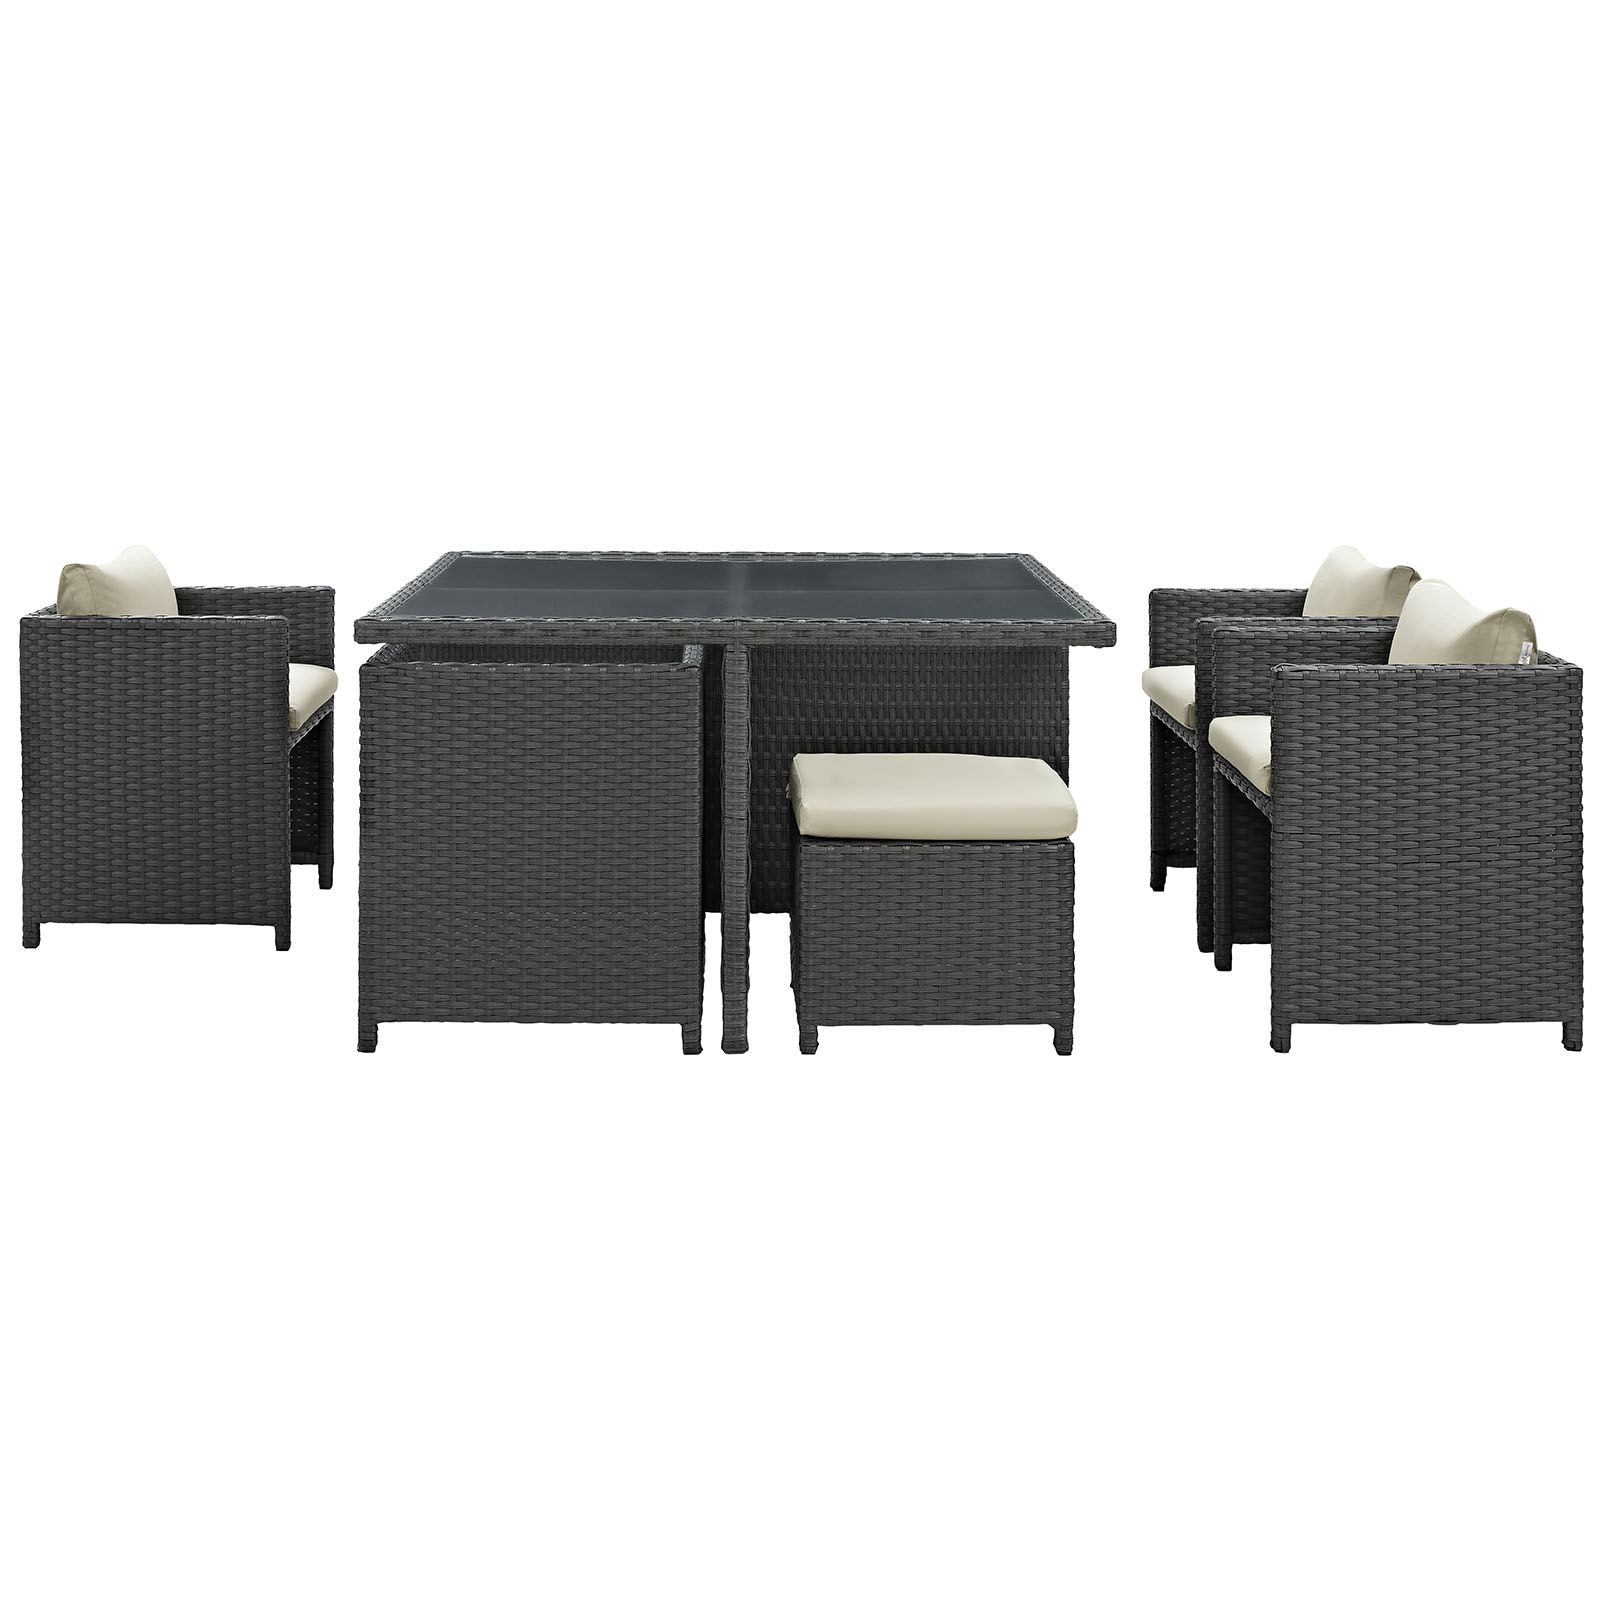 Modway Sojourn 9 Piece Outdoor Patio Sunbrella® Dining Set in Antique Canvas Beige - image 4 of 5